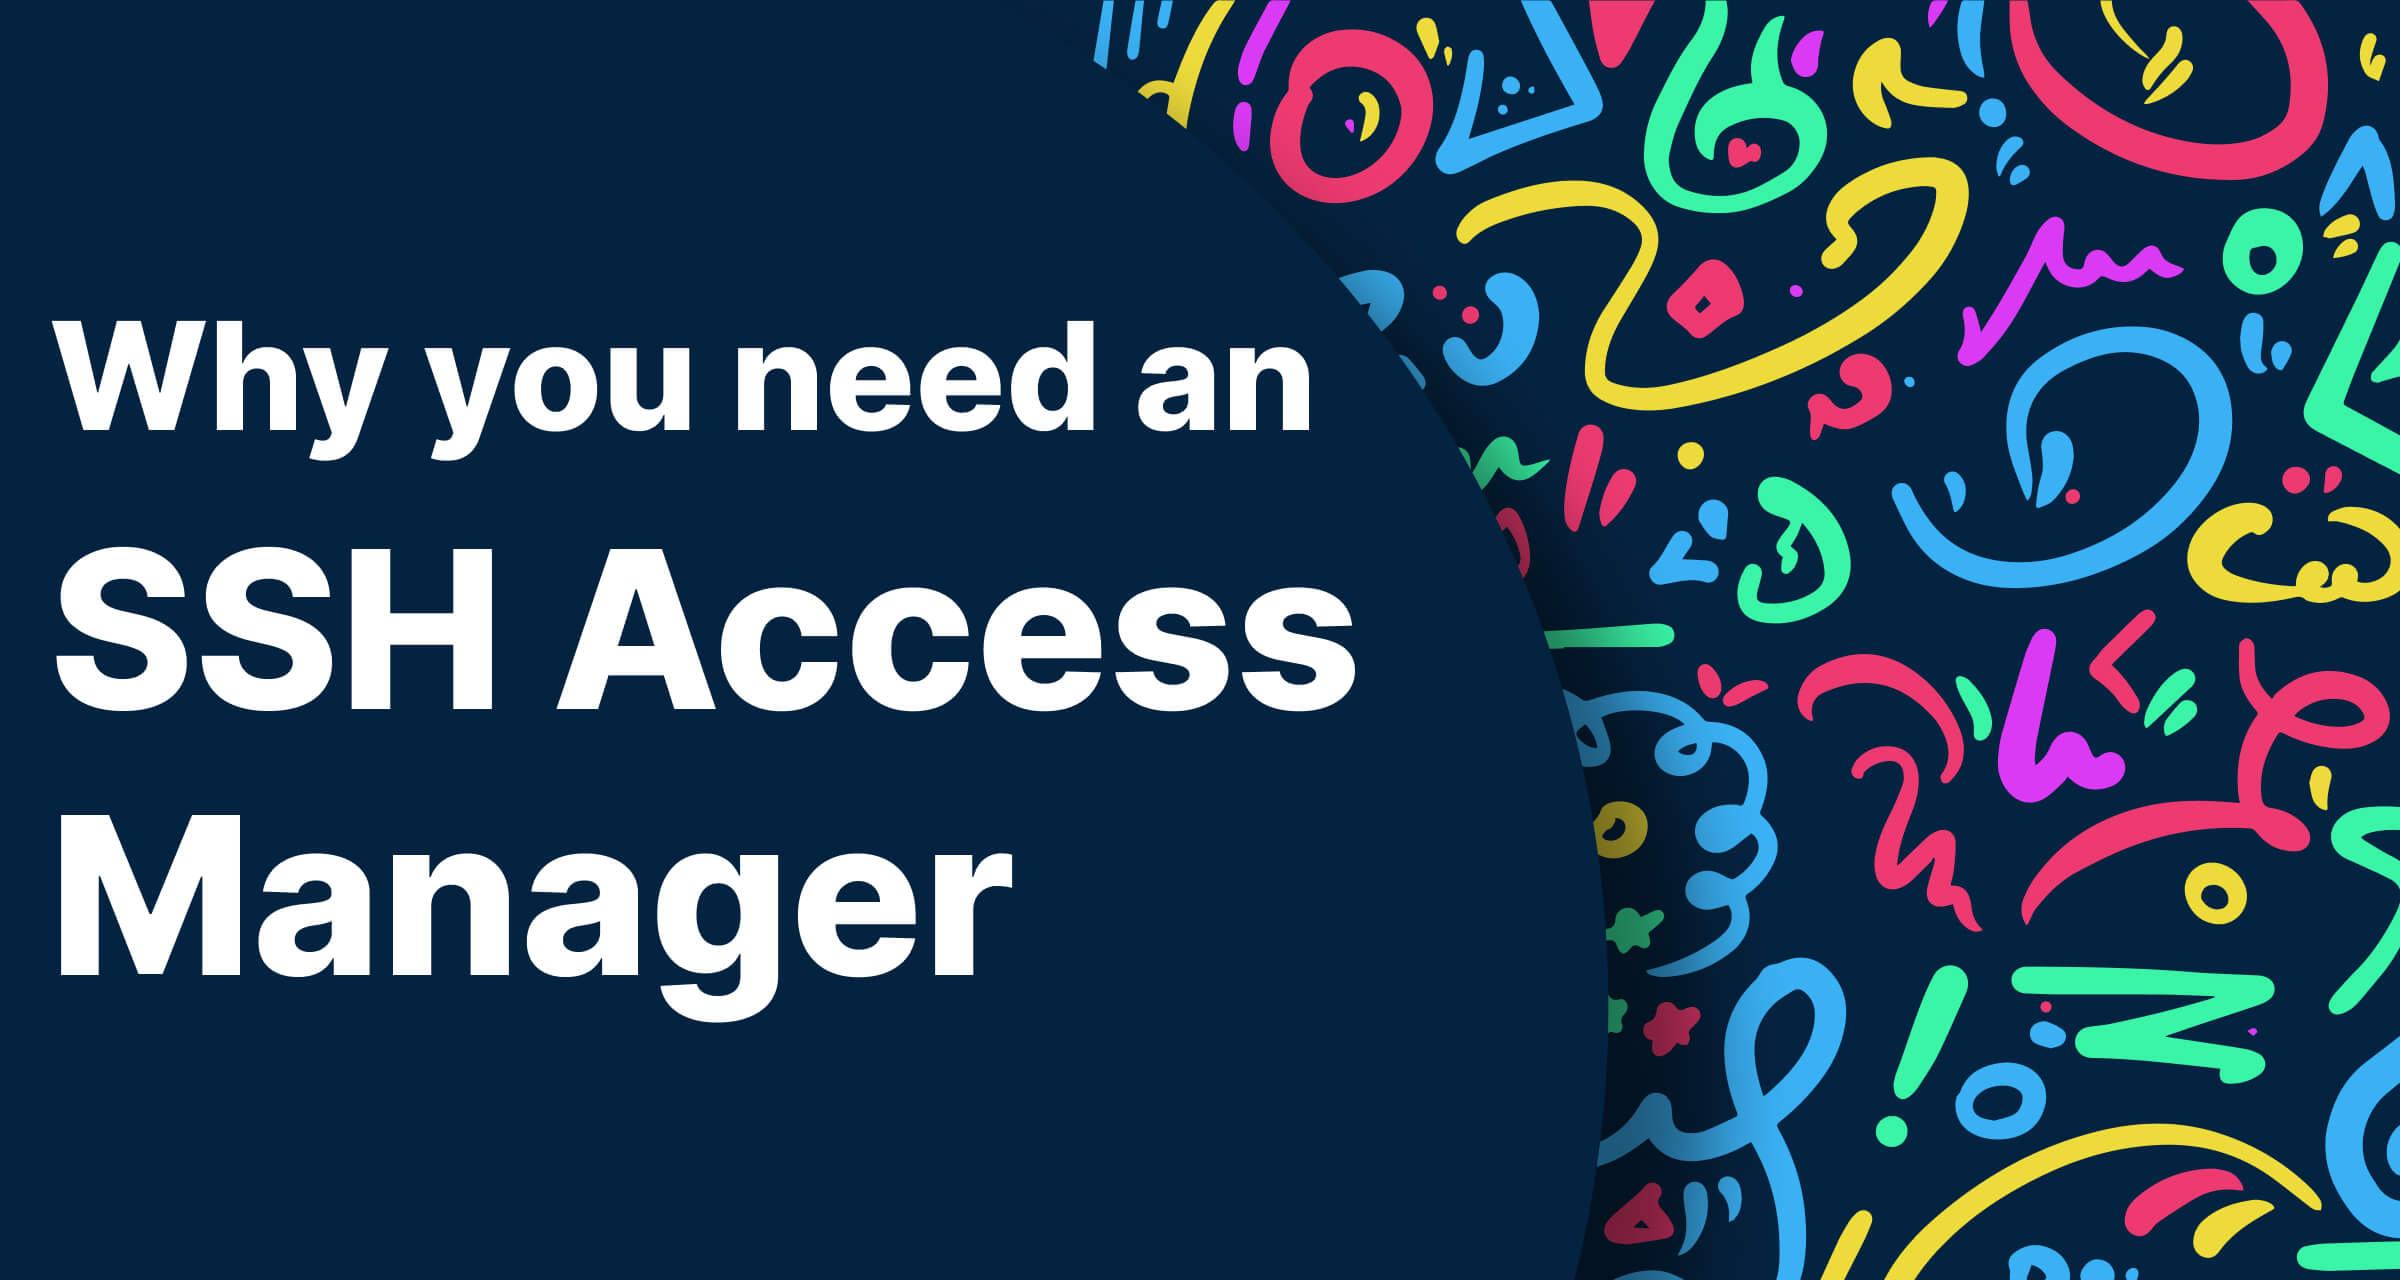 why-you-need-an-ssh-access-manager.jpg